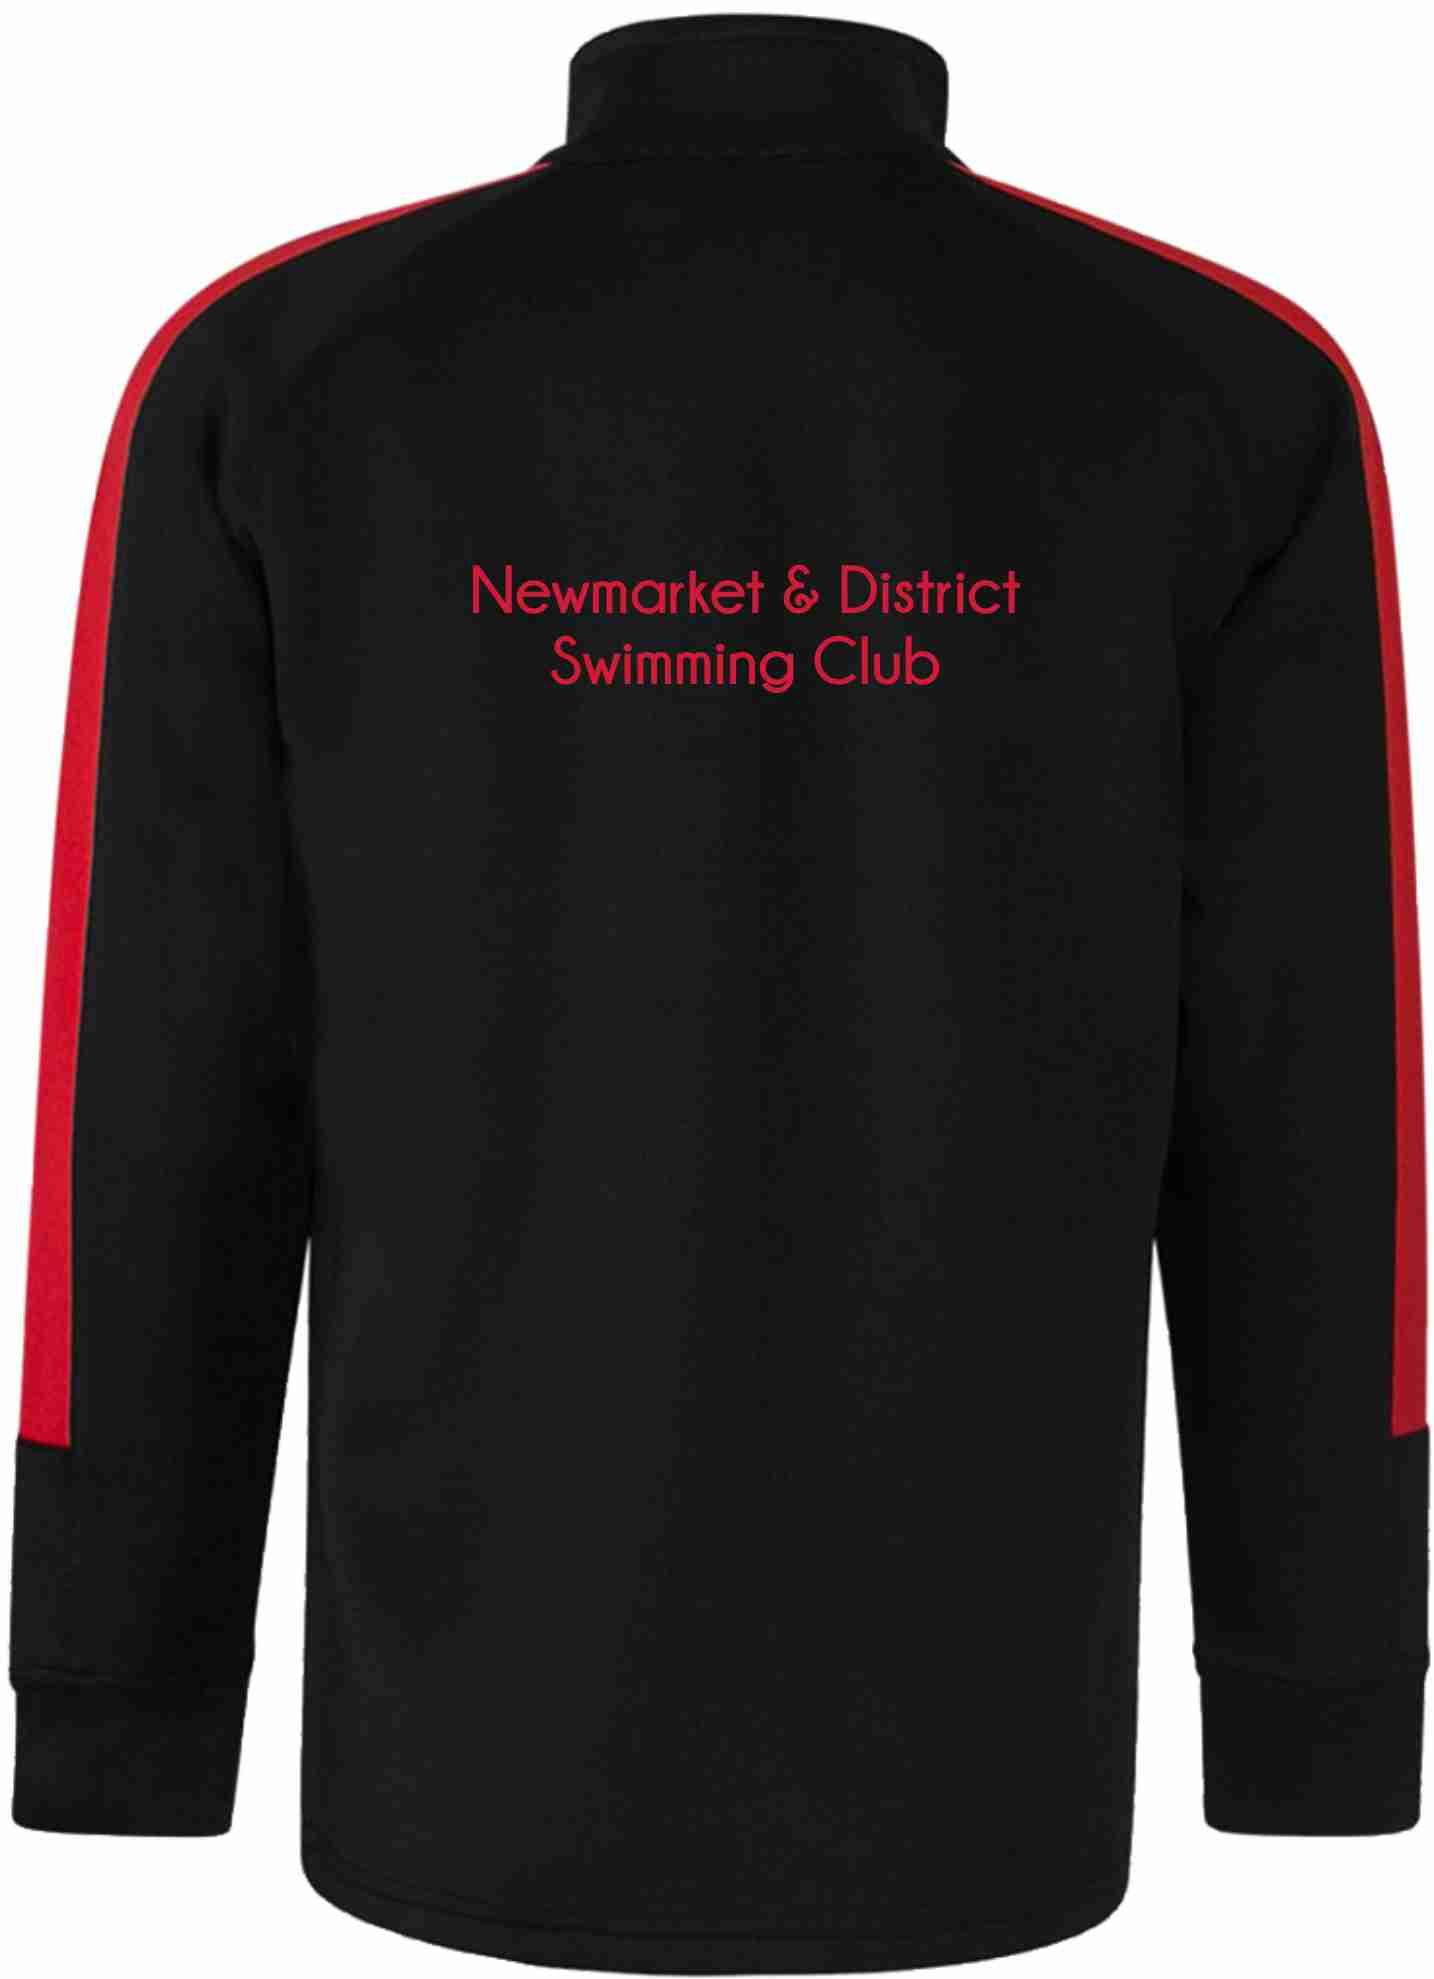 Newmarket and District Swimming Club – Zipped Tracksuit Top Adult